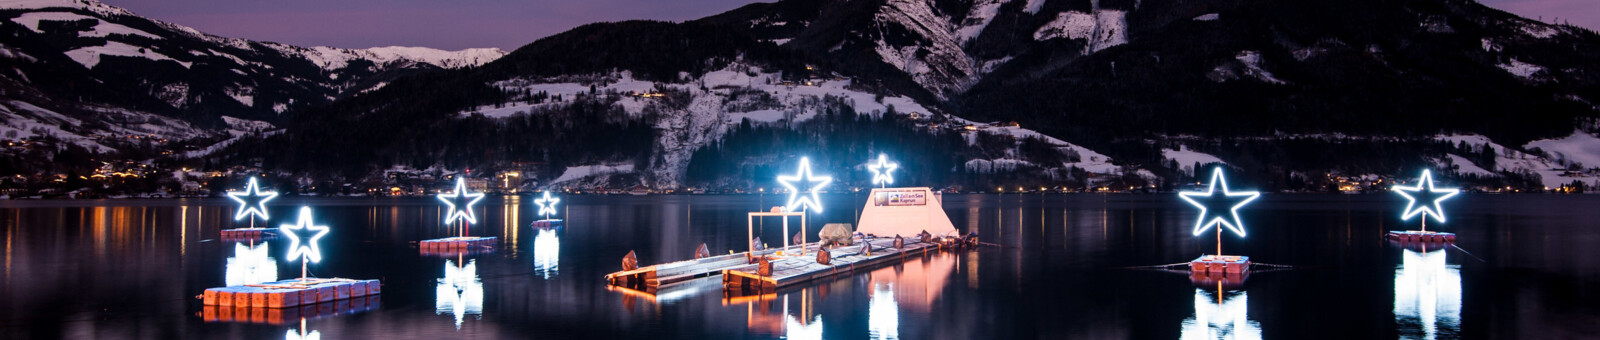     Sternenadvent, Zell am See 